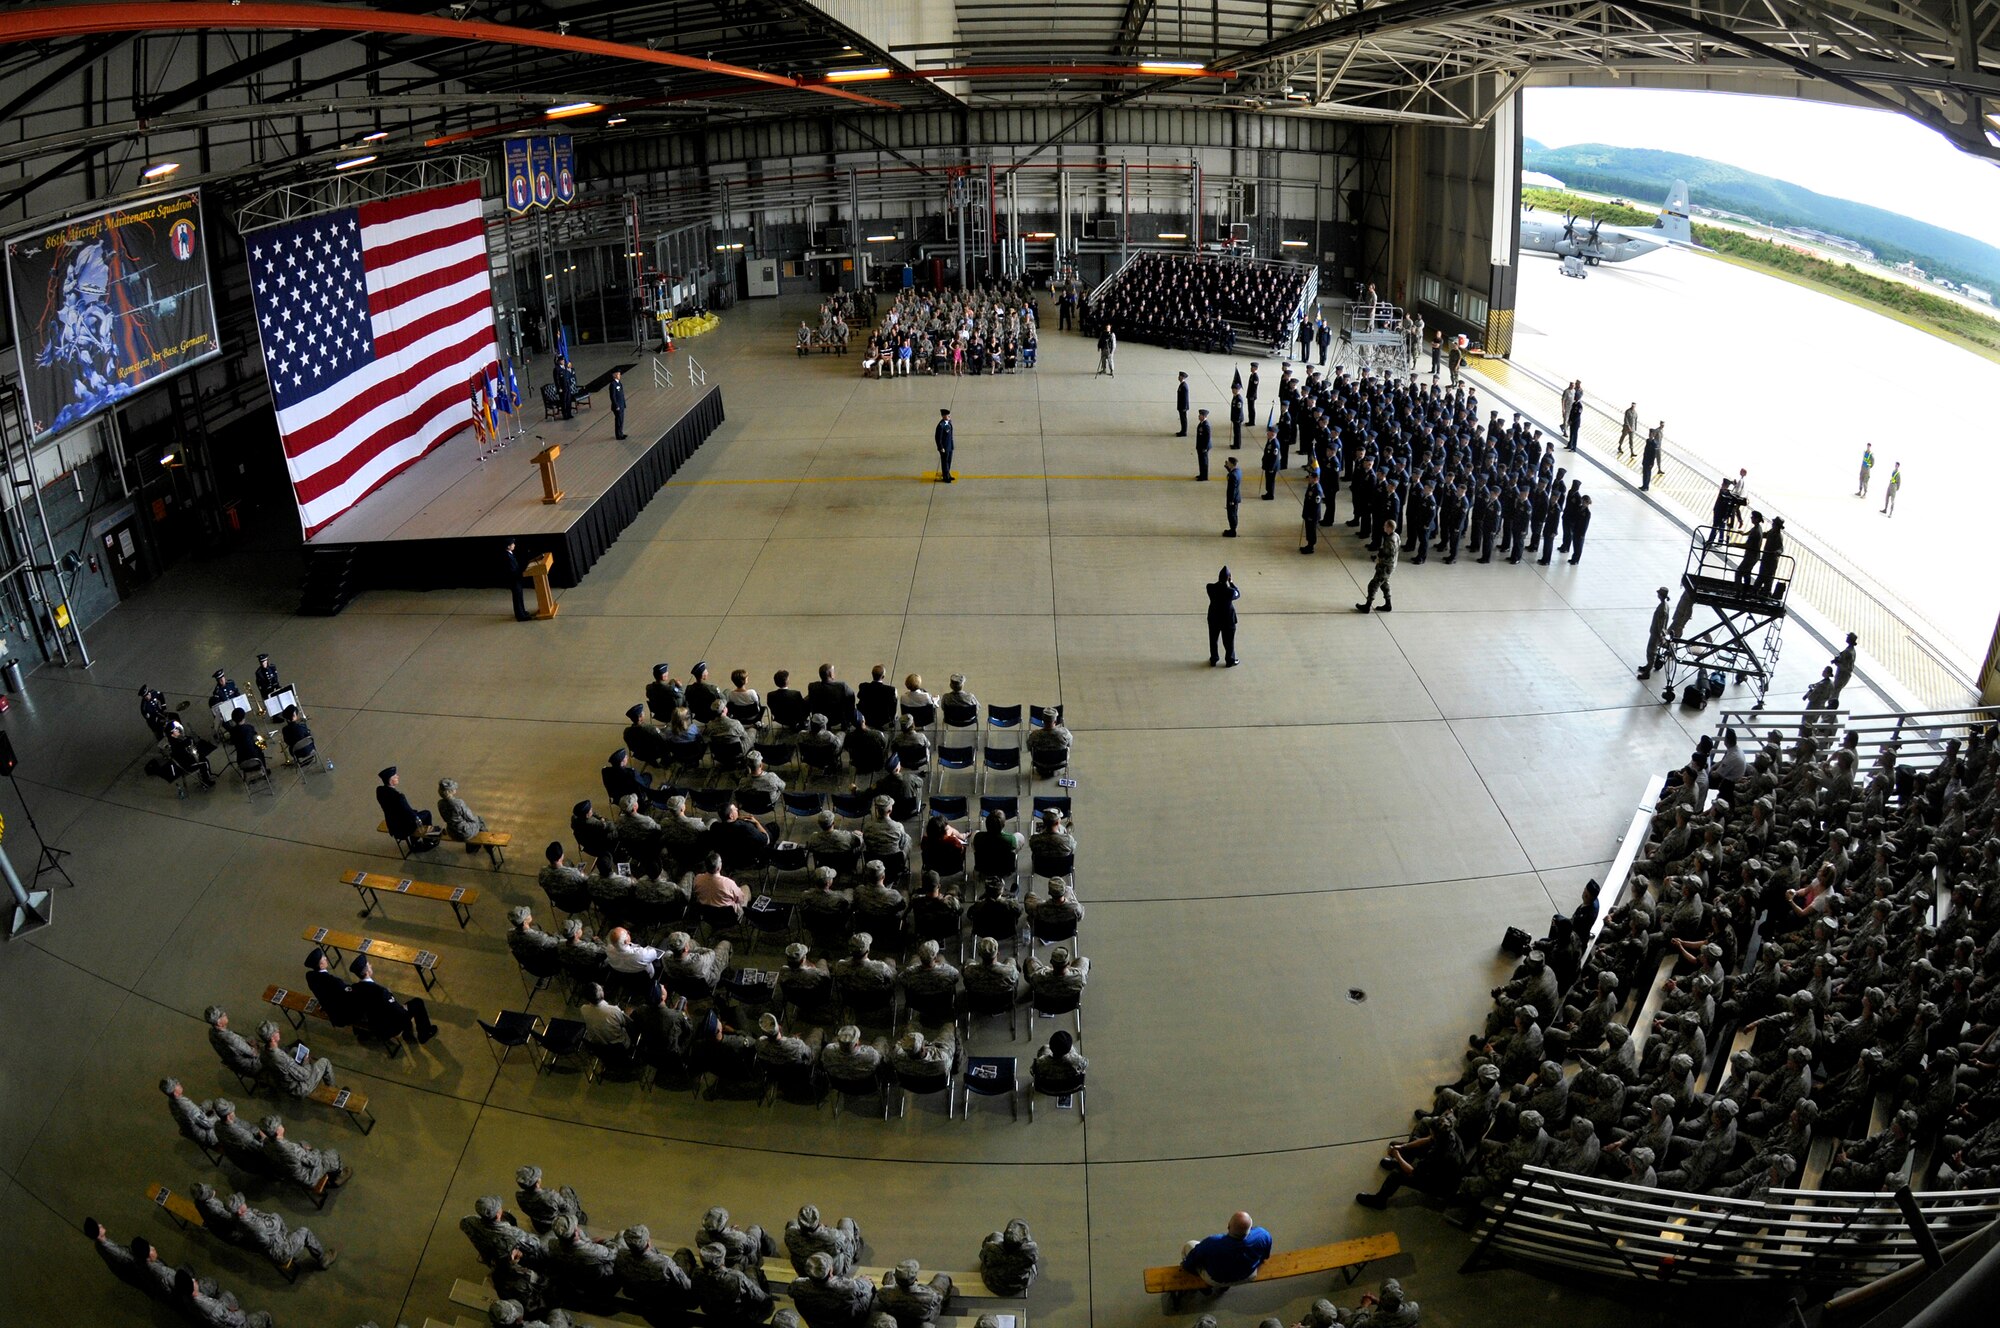 Members of Team Ramstein participate in the 435th Air Base Wing redesignation ceremony, Ramstein Air Base, Germany, July 16, 2009. During the ceremony, the 435th ABW was redesignated to the 435th AGOW, the first of its kind in U.S. Air Forces in Europe. (U.S. Air Force photo by Staff Sgt. Stephen J. Otero)